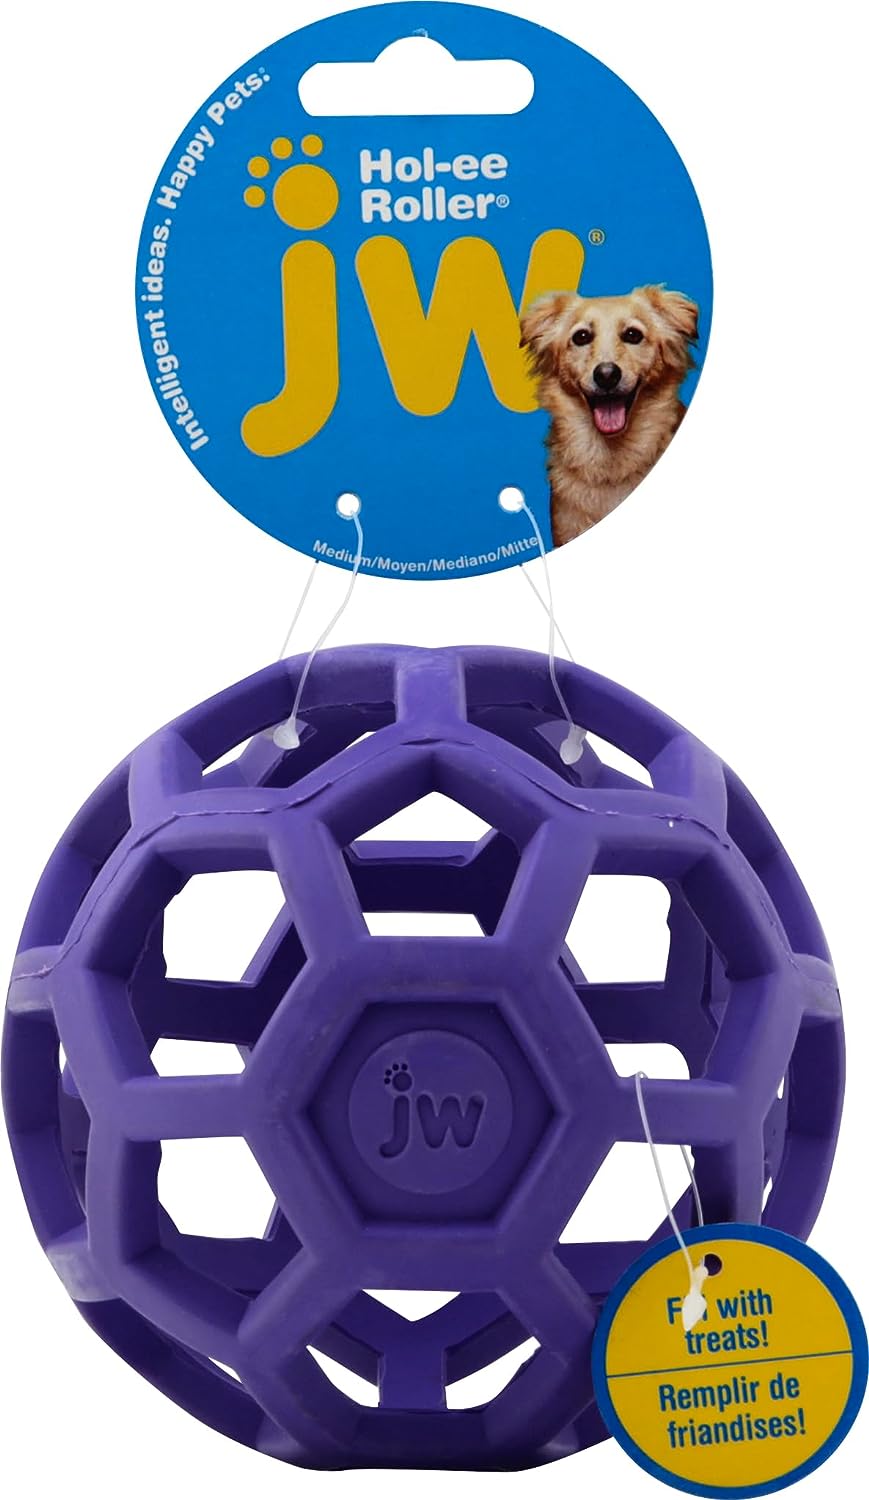 Purple rubber treat ball dispenser on white background hanging from the product tag